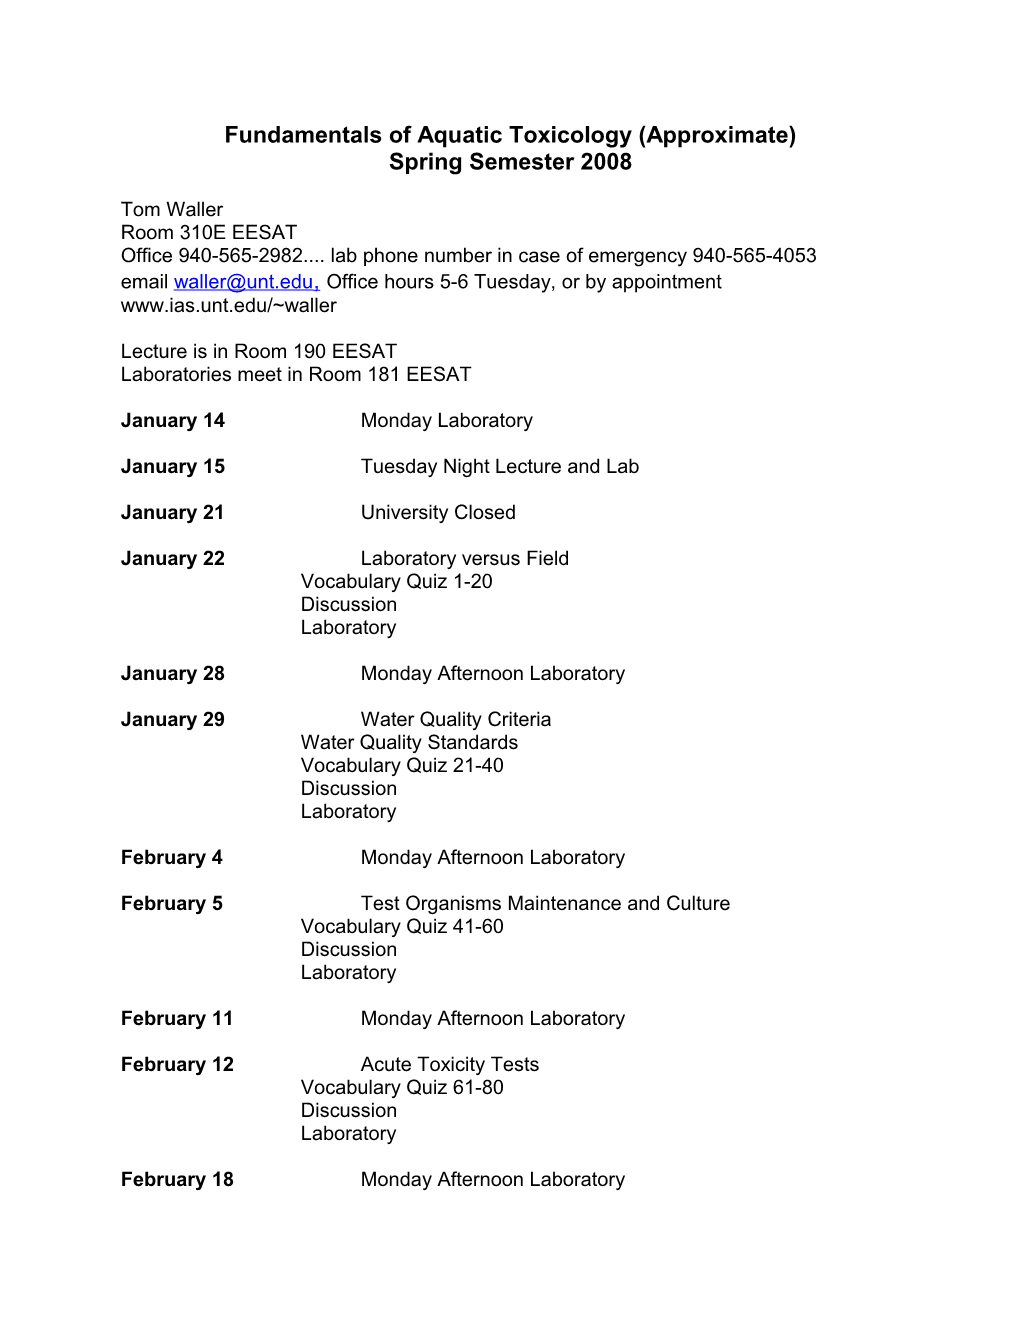 The Spring 2004 Syllabus Has Not Yet Been Posted